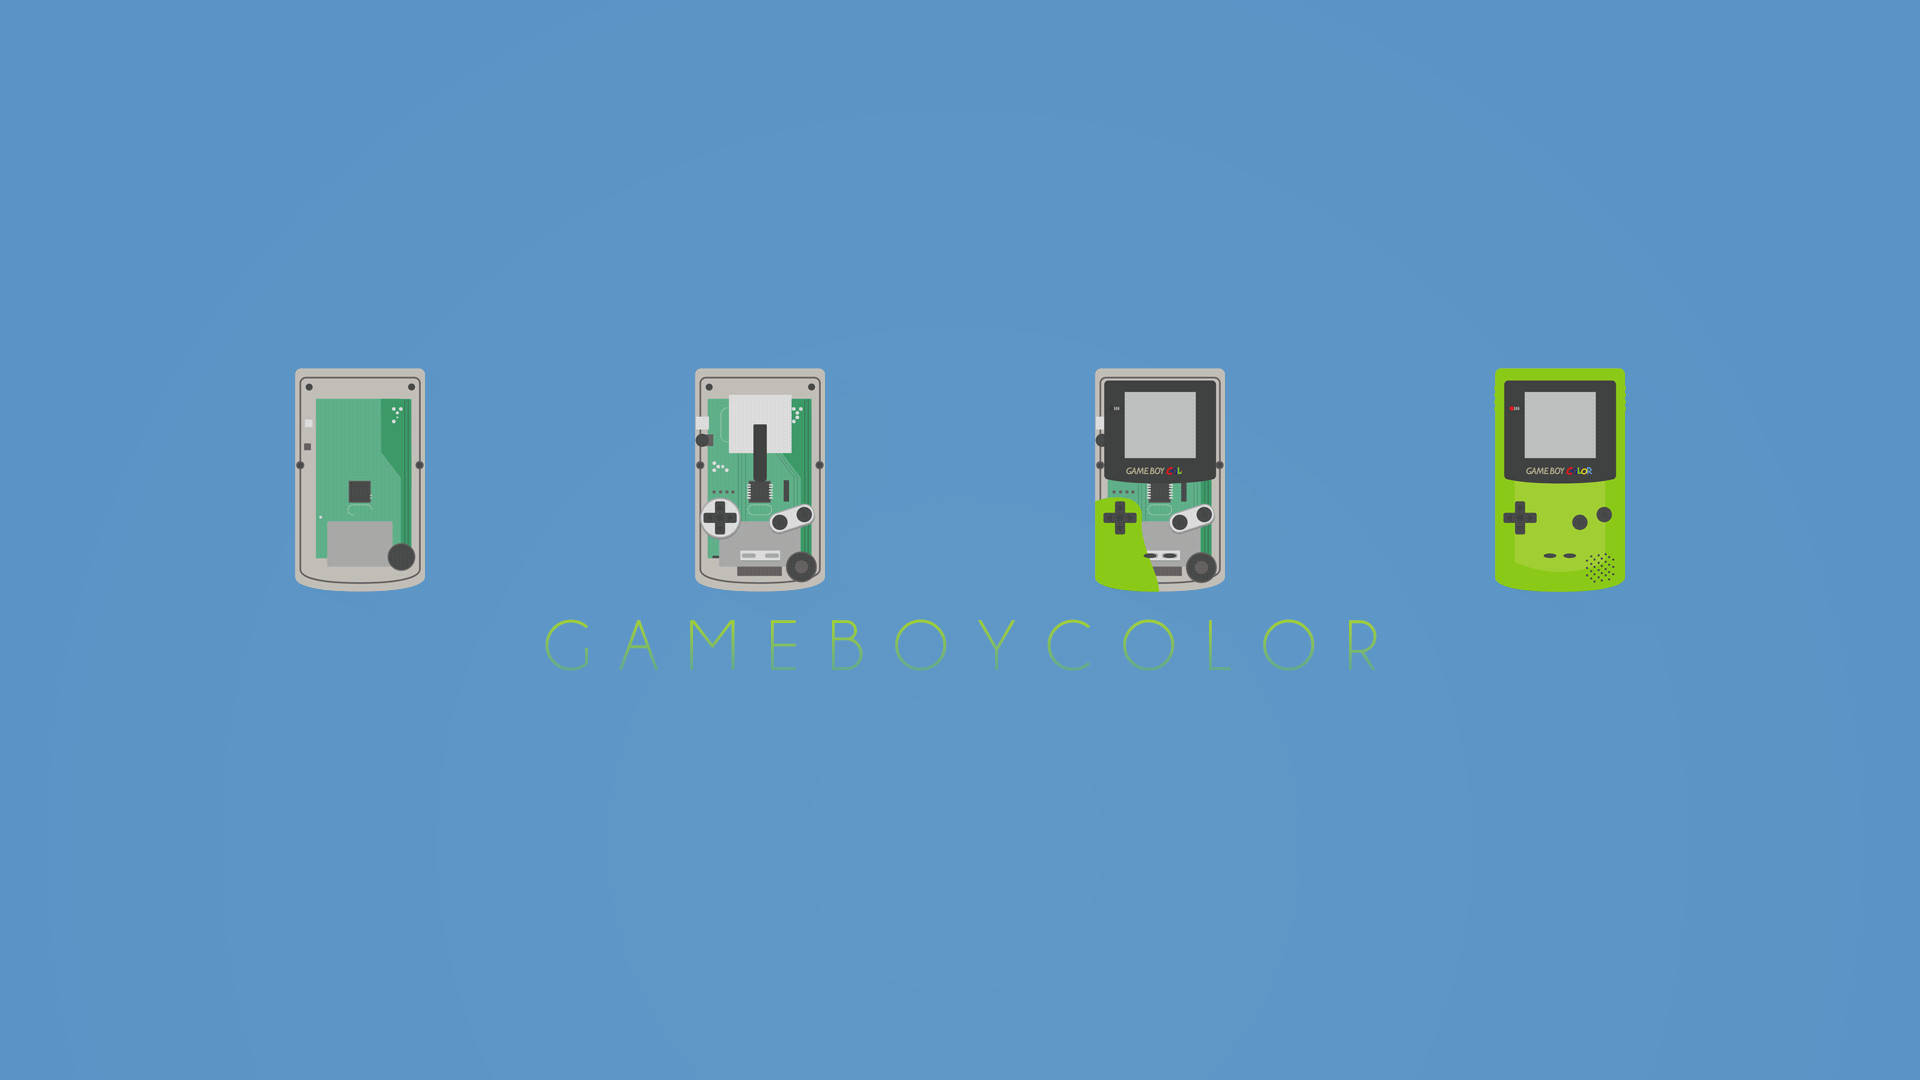 Game Boy Color Step By Step Construction